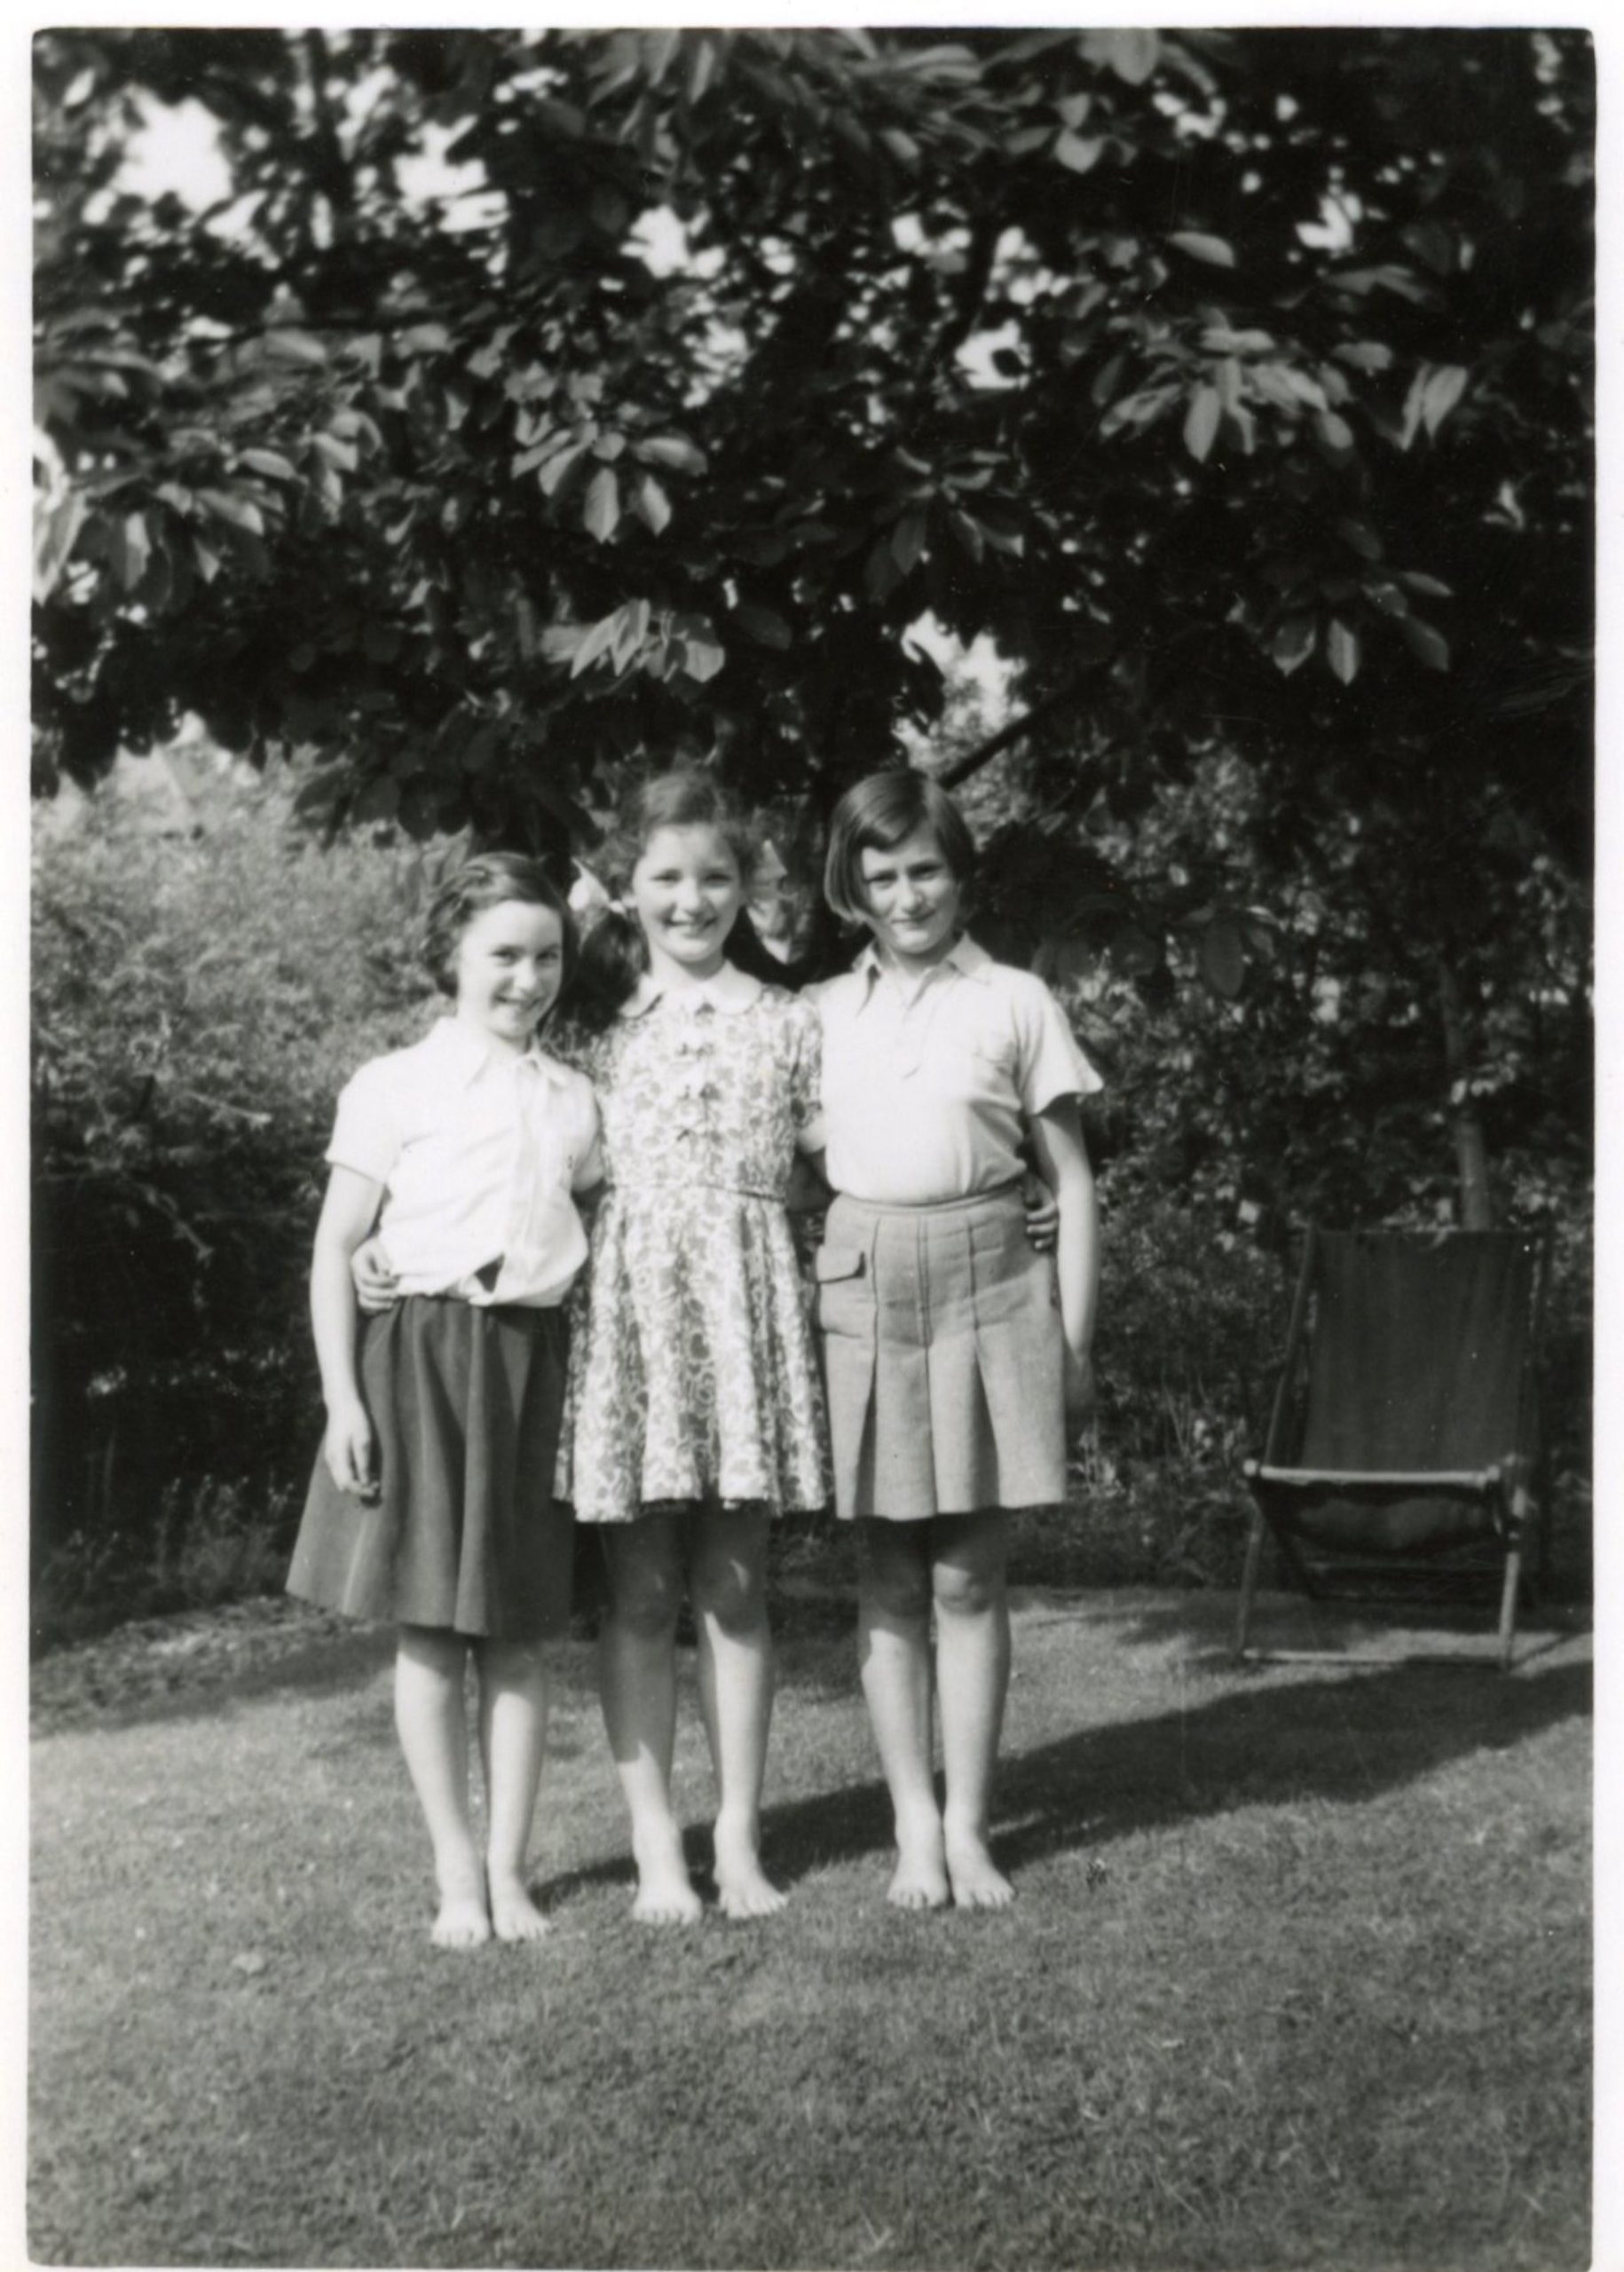 Three young girls who lived on Wells Road. Left to right: me, Monica, and Heather